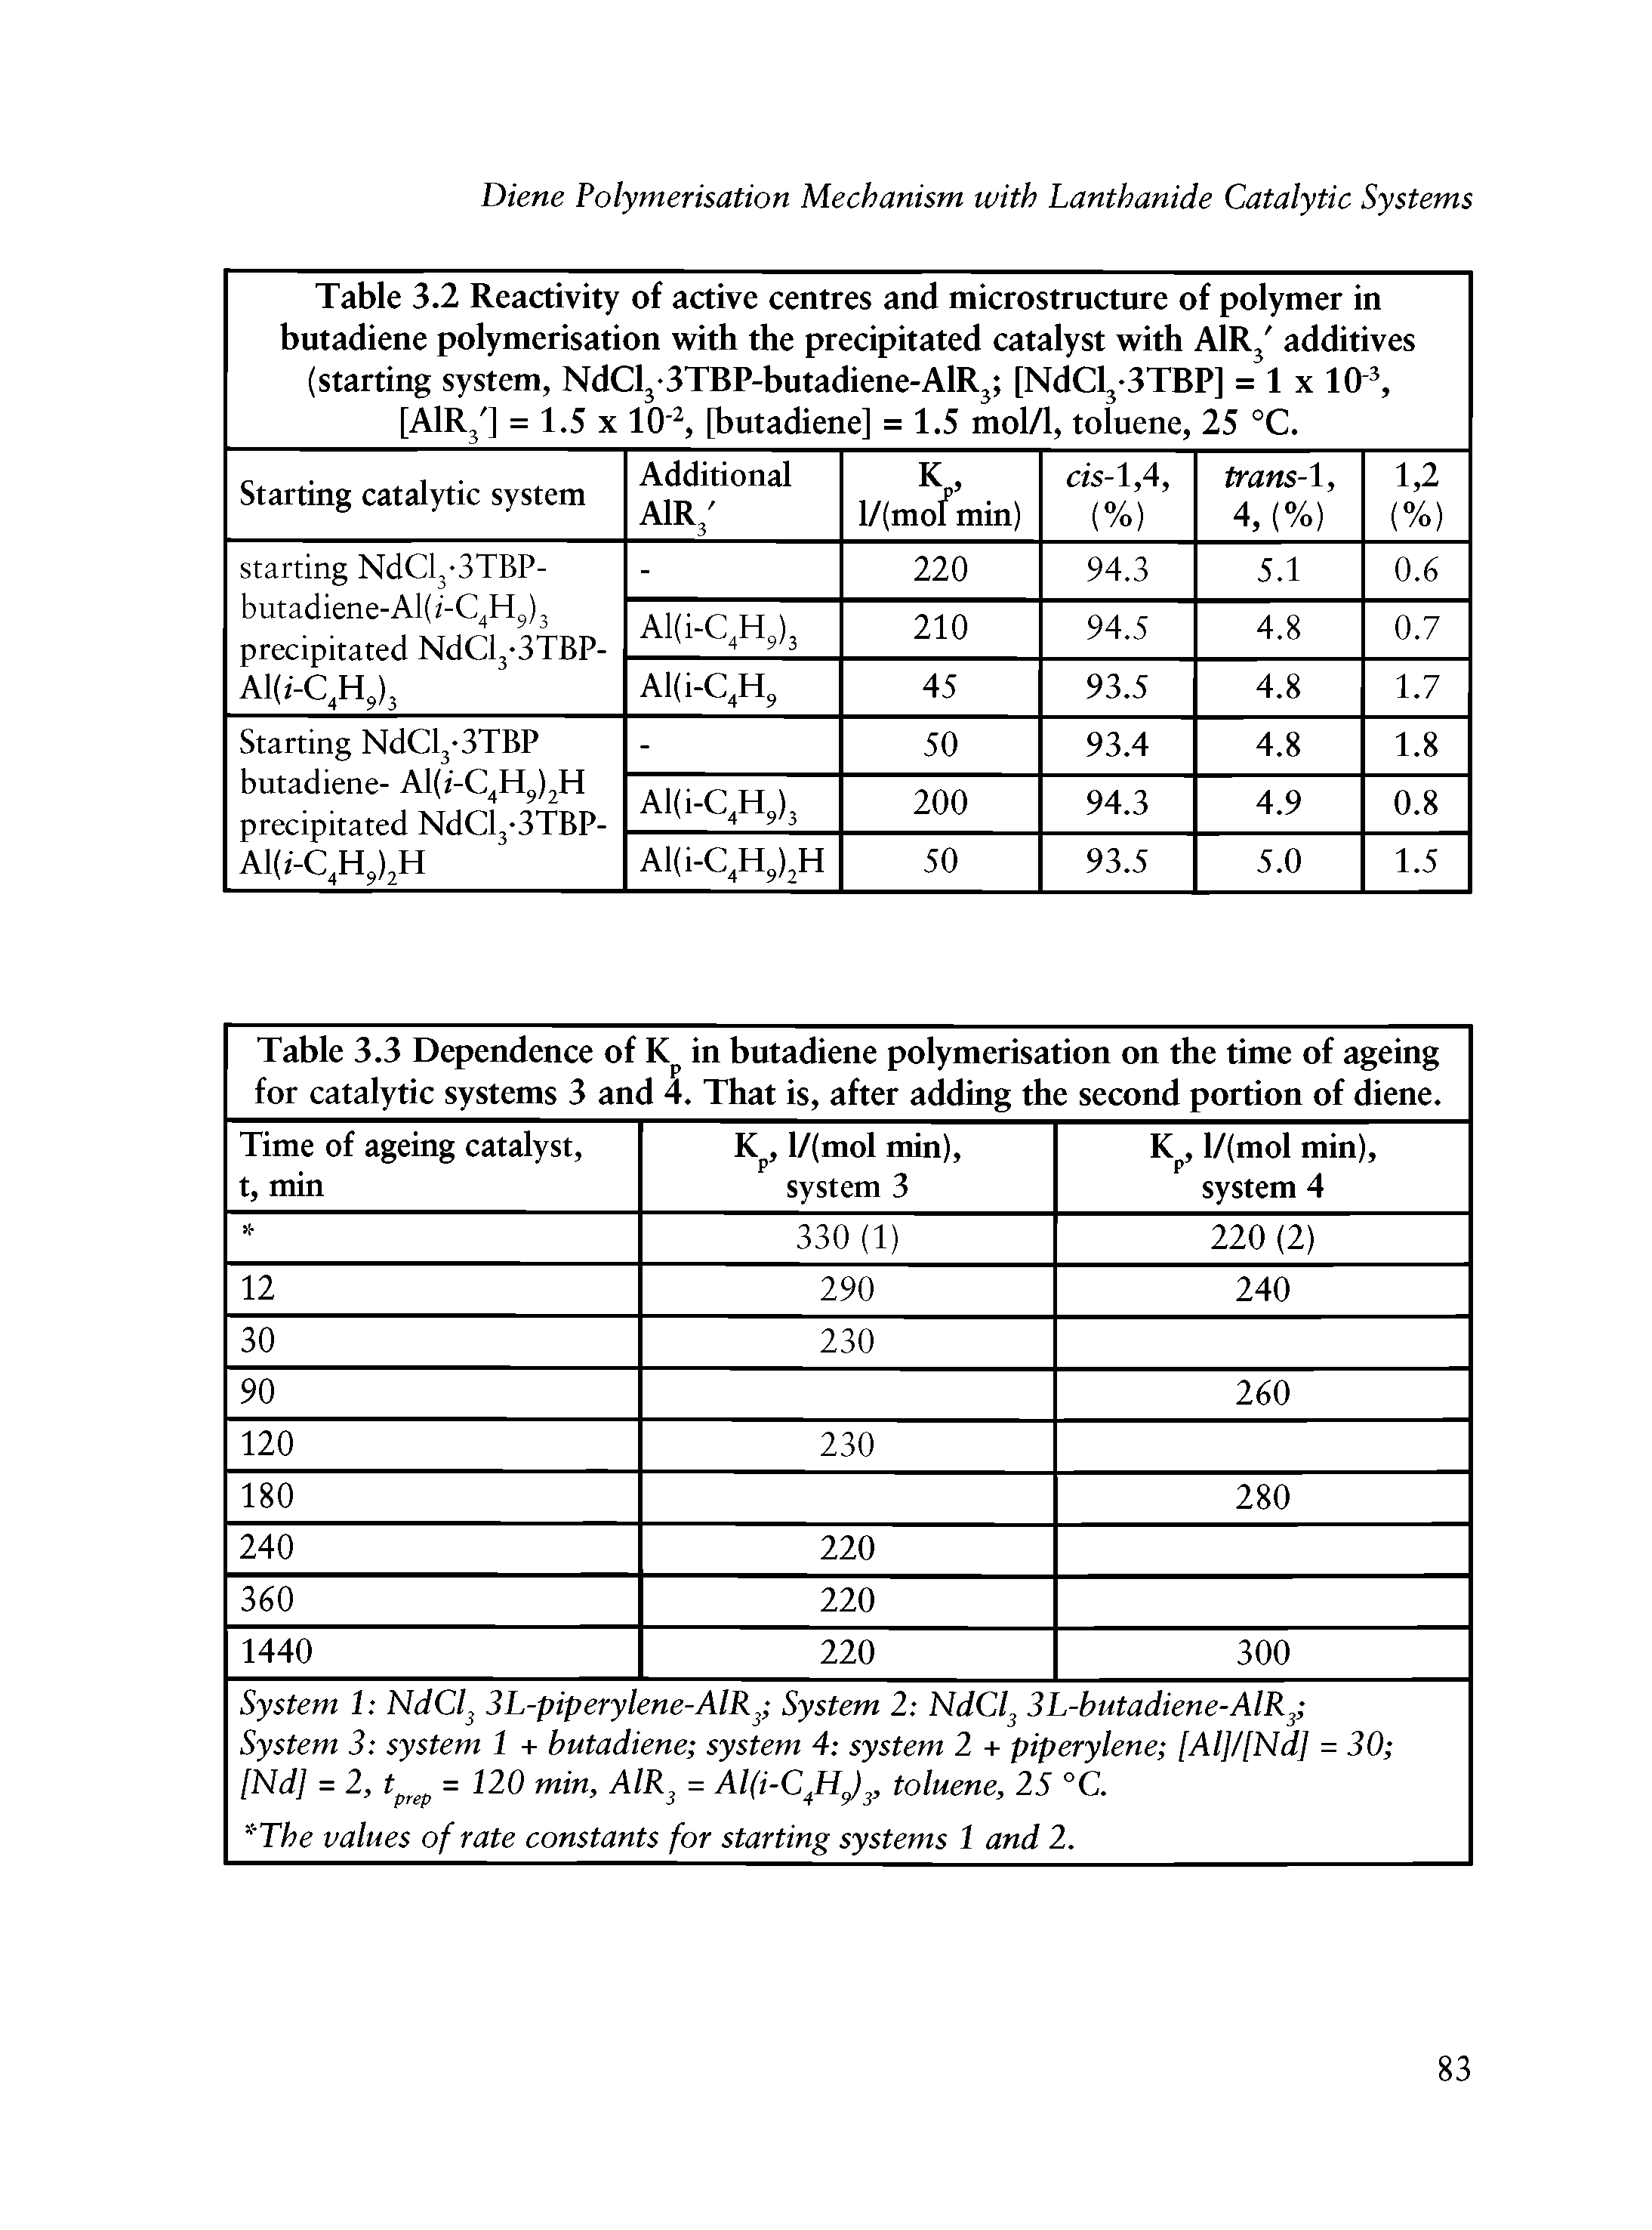 Table 3.2 Reactivity of active centres and microstructure of polymer in butadiene polymerisation with the precipitated catalyst with AlRj additives (starting system, NdClj TBP-butadiene-AlRj [NdClj-STBP] = 1 x 10, [AlRj ] = 1.5 X 10, [butadiene] = 1.5 mol/1, toluene, 25 °C.